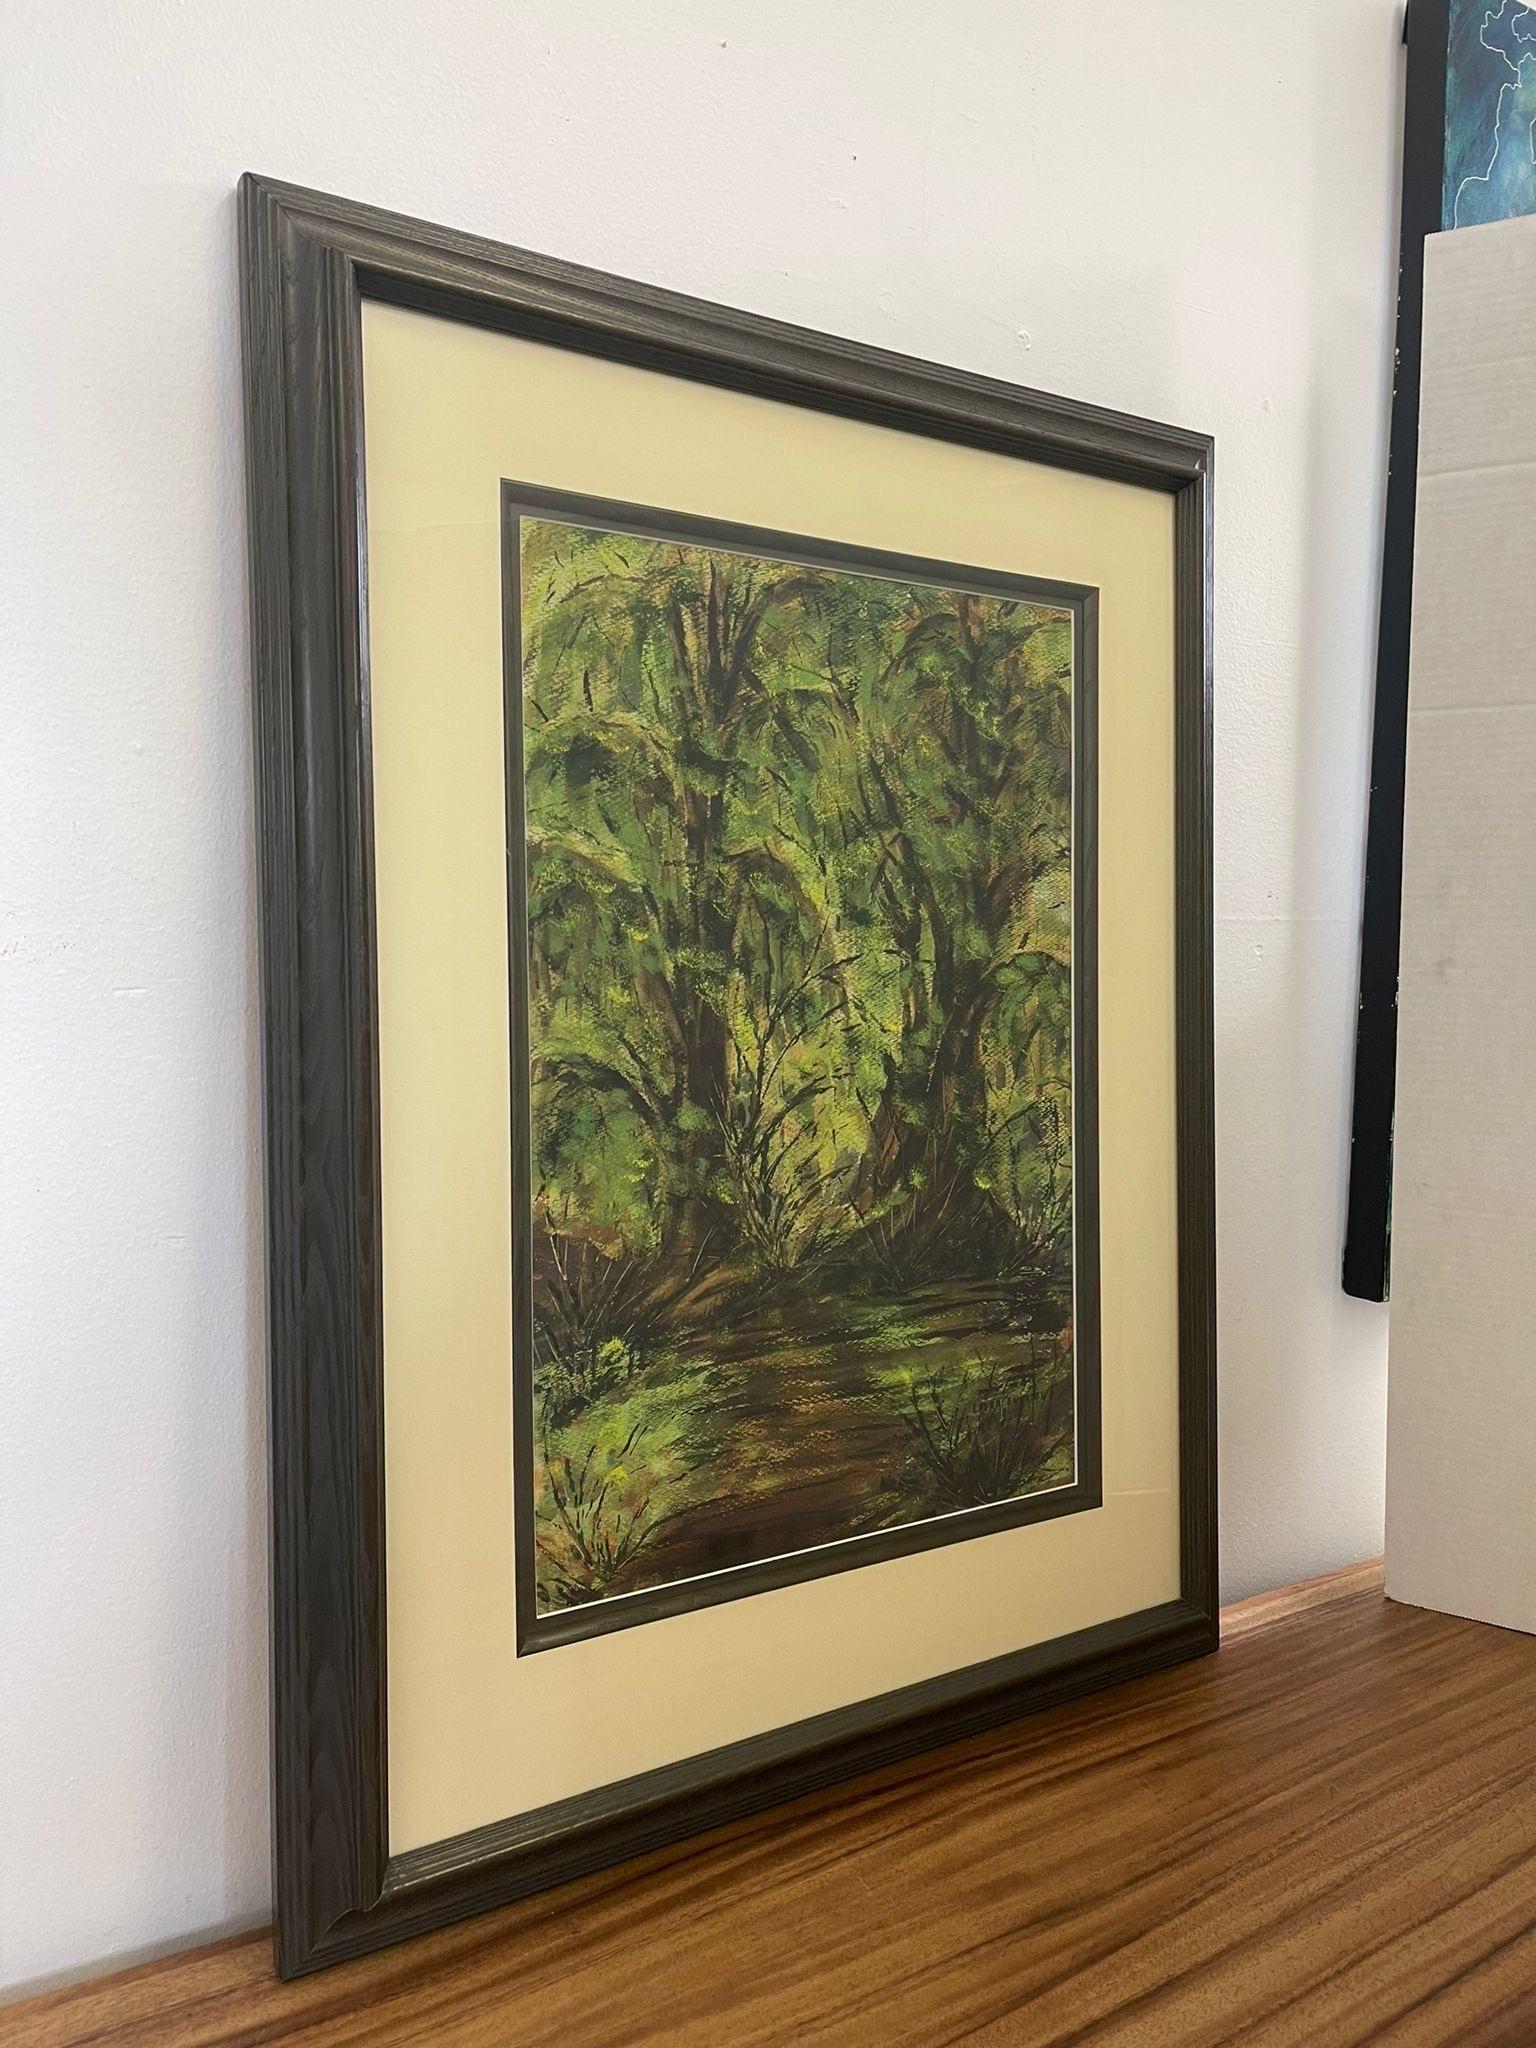 Vintage Original Mixed Media Artwork of the River Rainforest by Laura Emerson In Good Condition For Sale In Seattle, WA